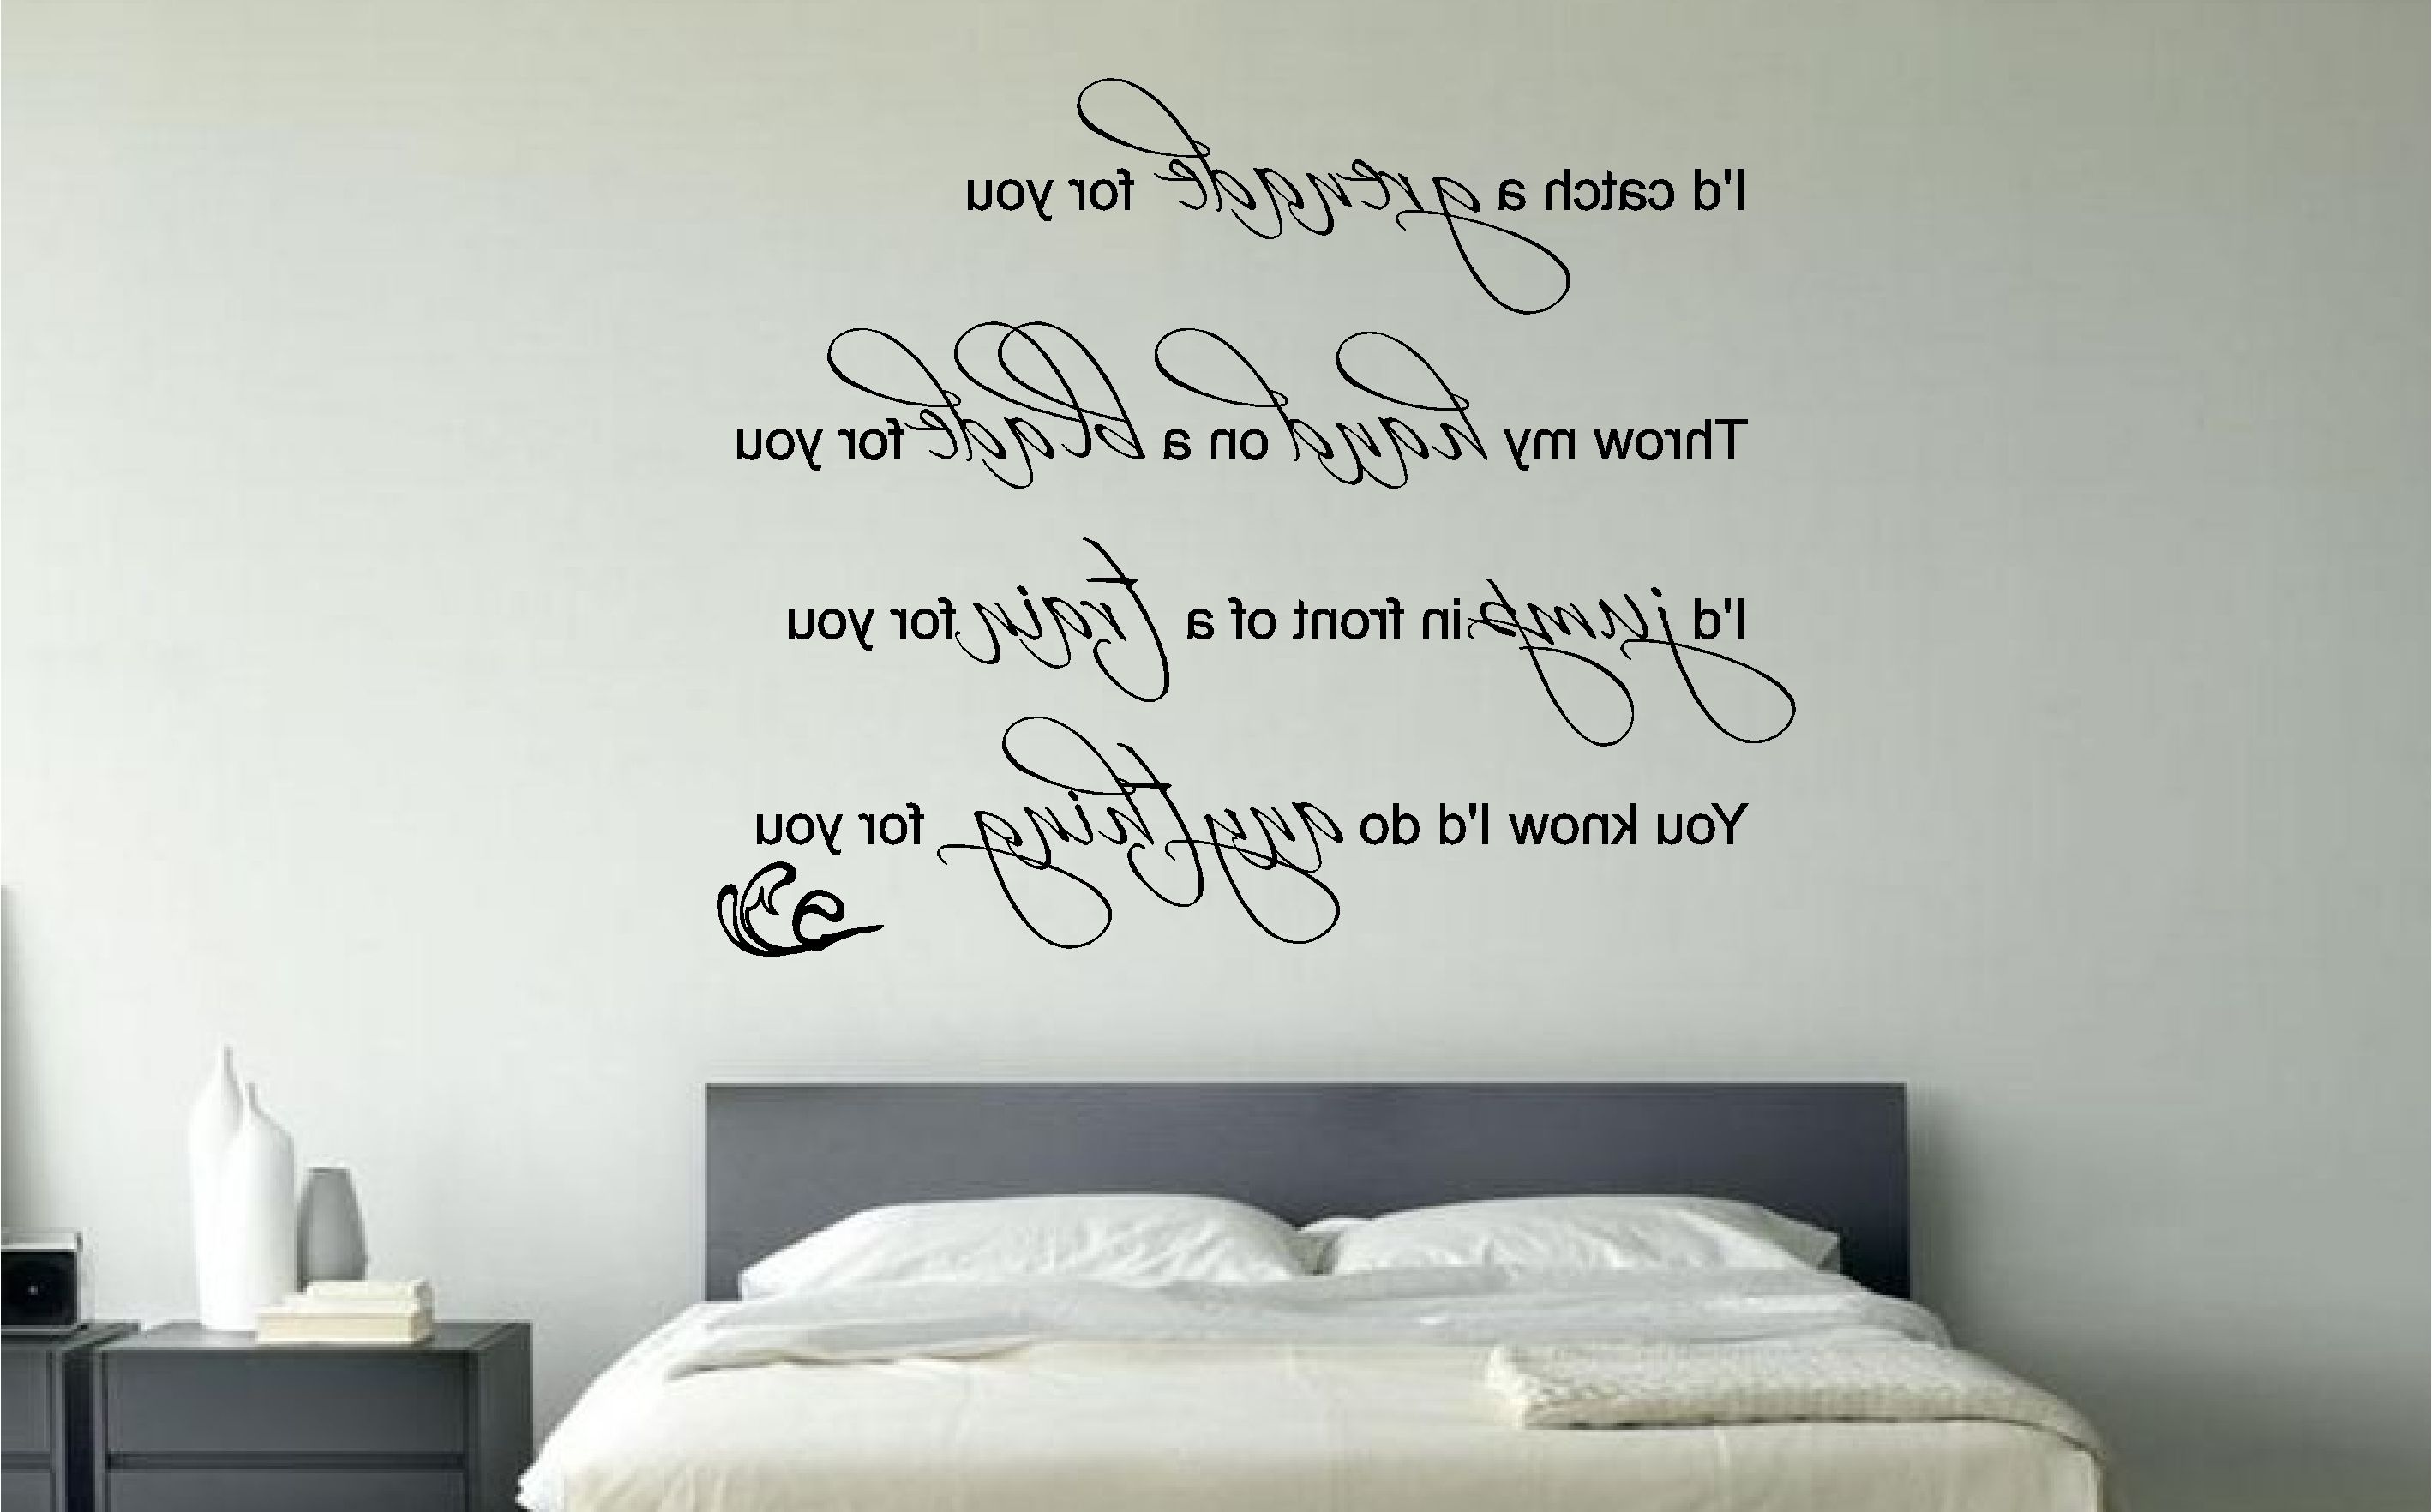 Wall Art For Bedrooms Throughout Popular Bedroom Wall Art Pictures – Bedroom Wall Art Ideas – Yodersmart (View 4 of 15)